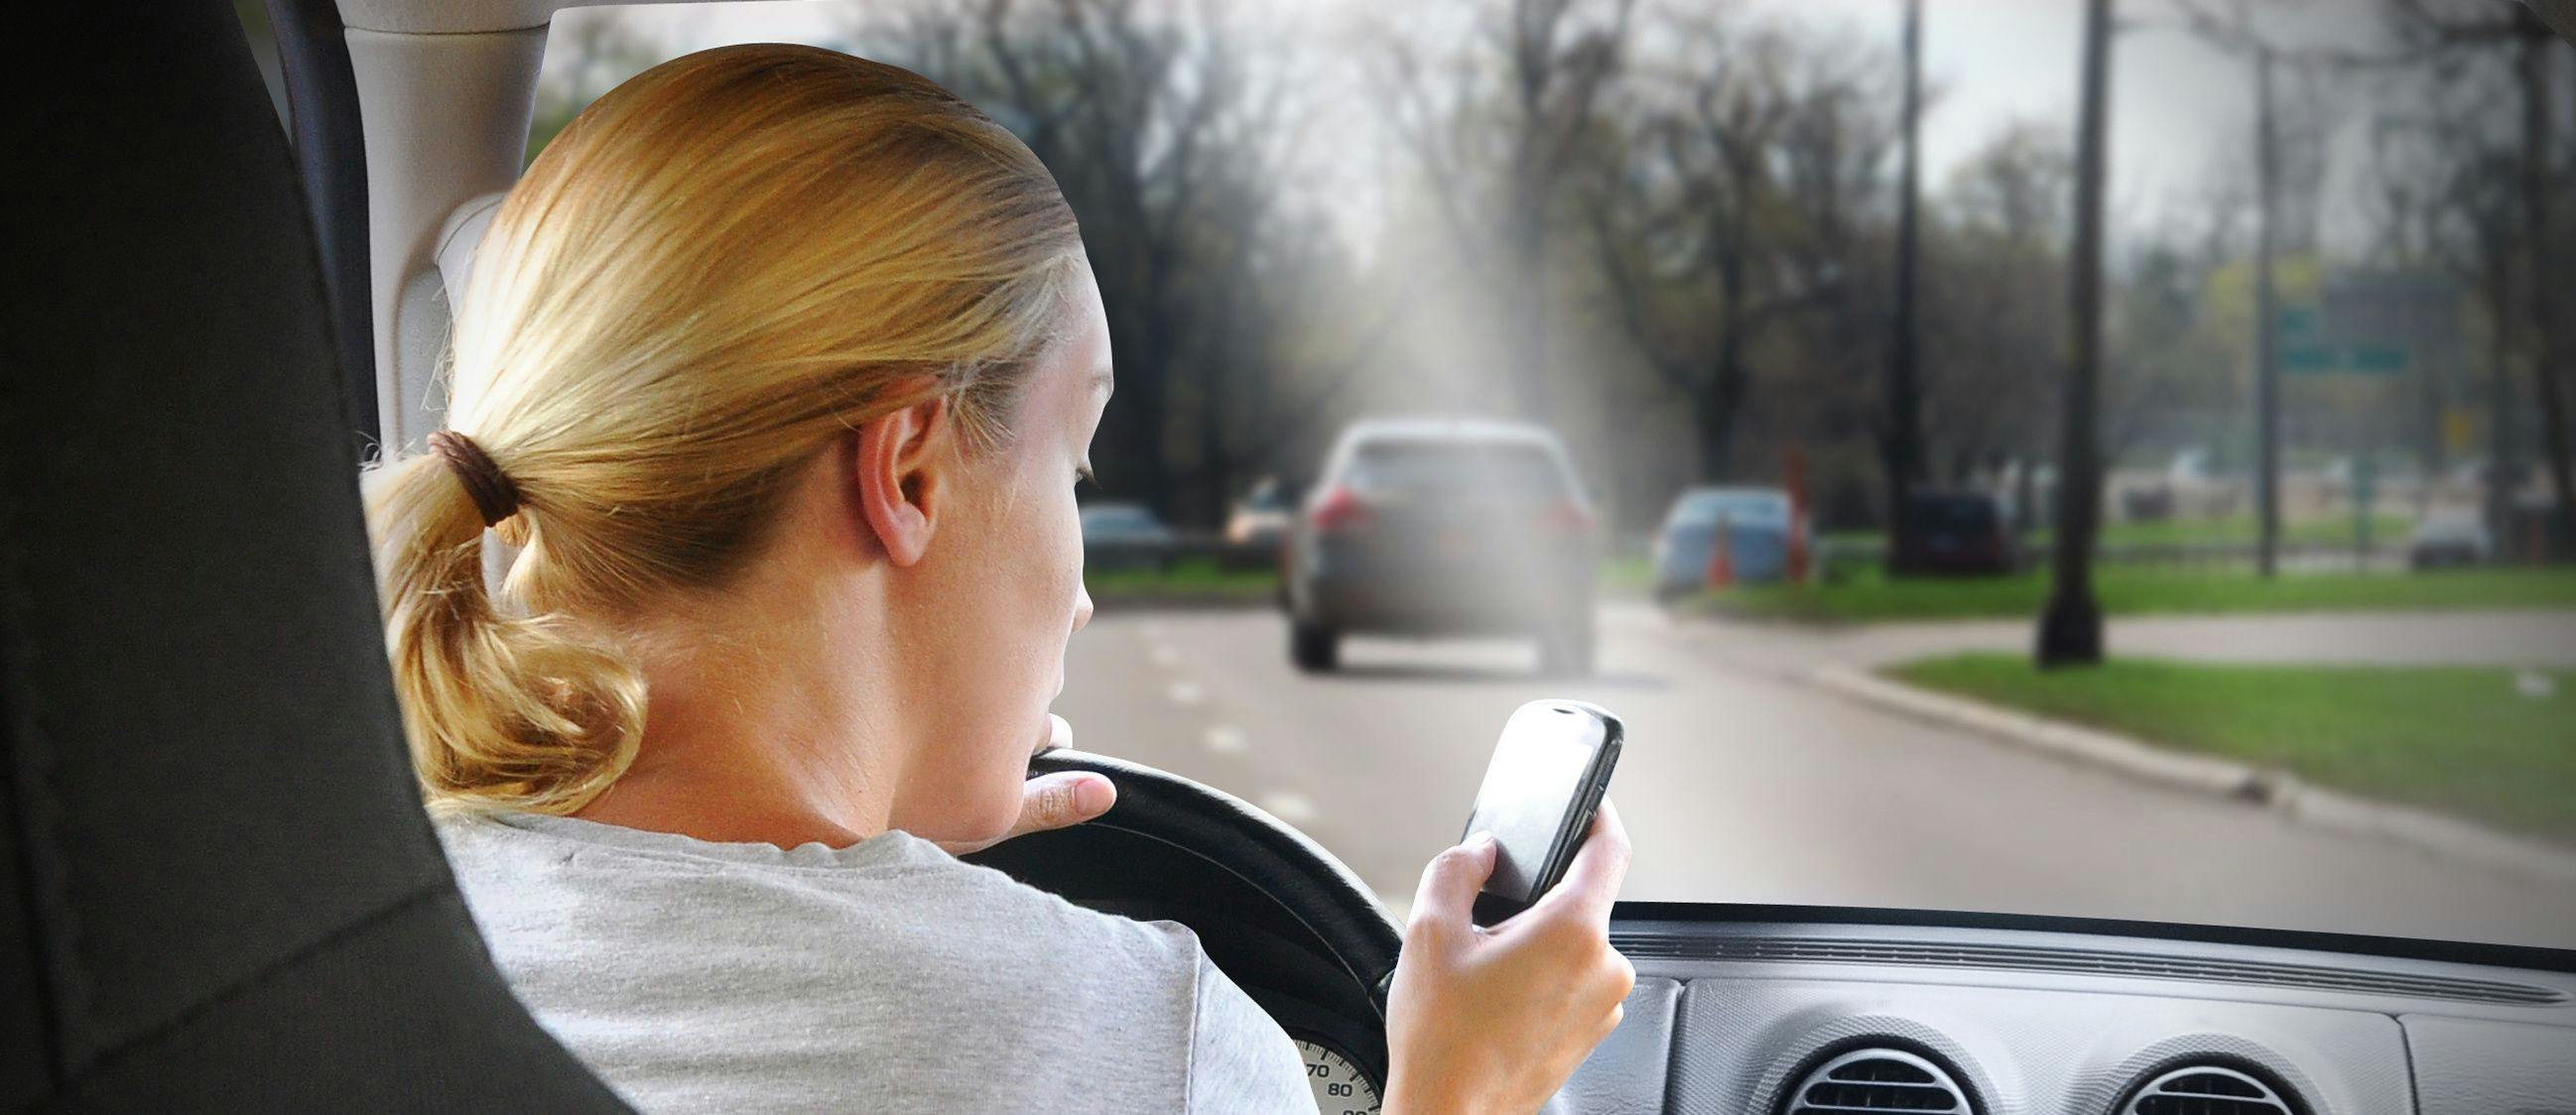 Women, Youth More Likely to Text and Drive